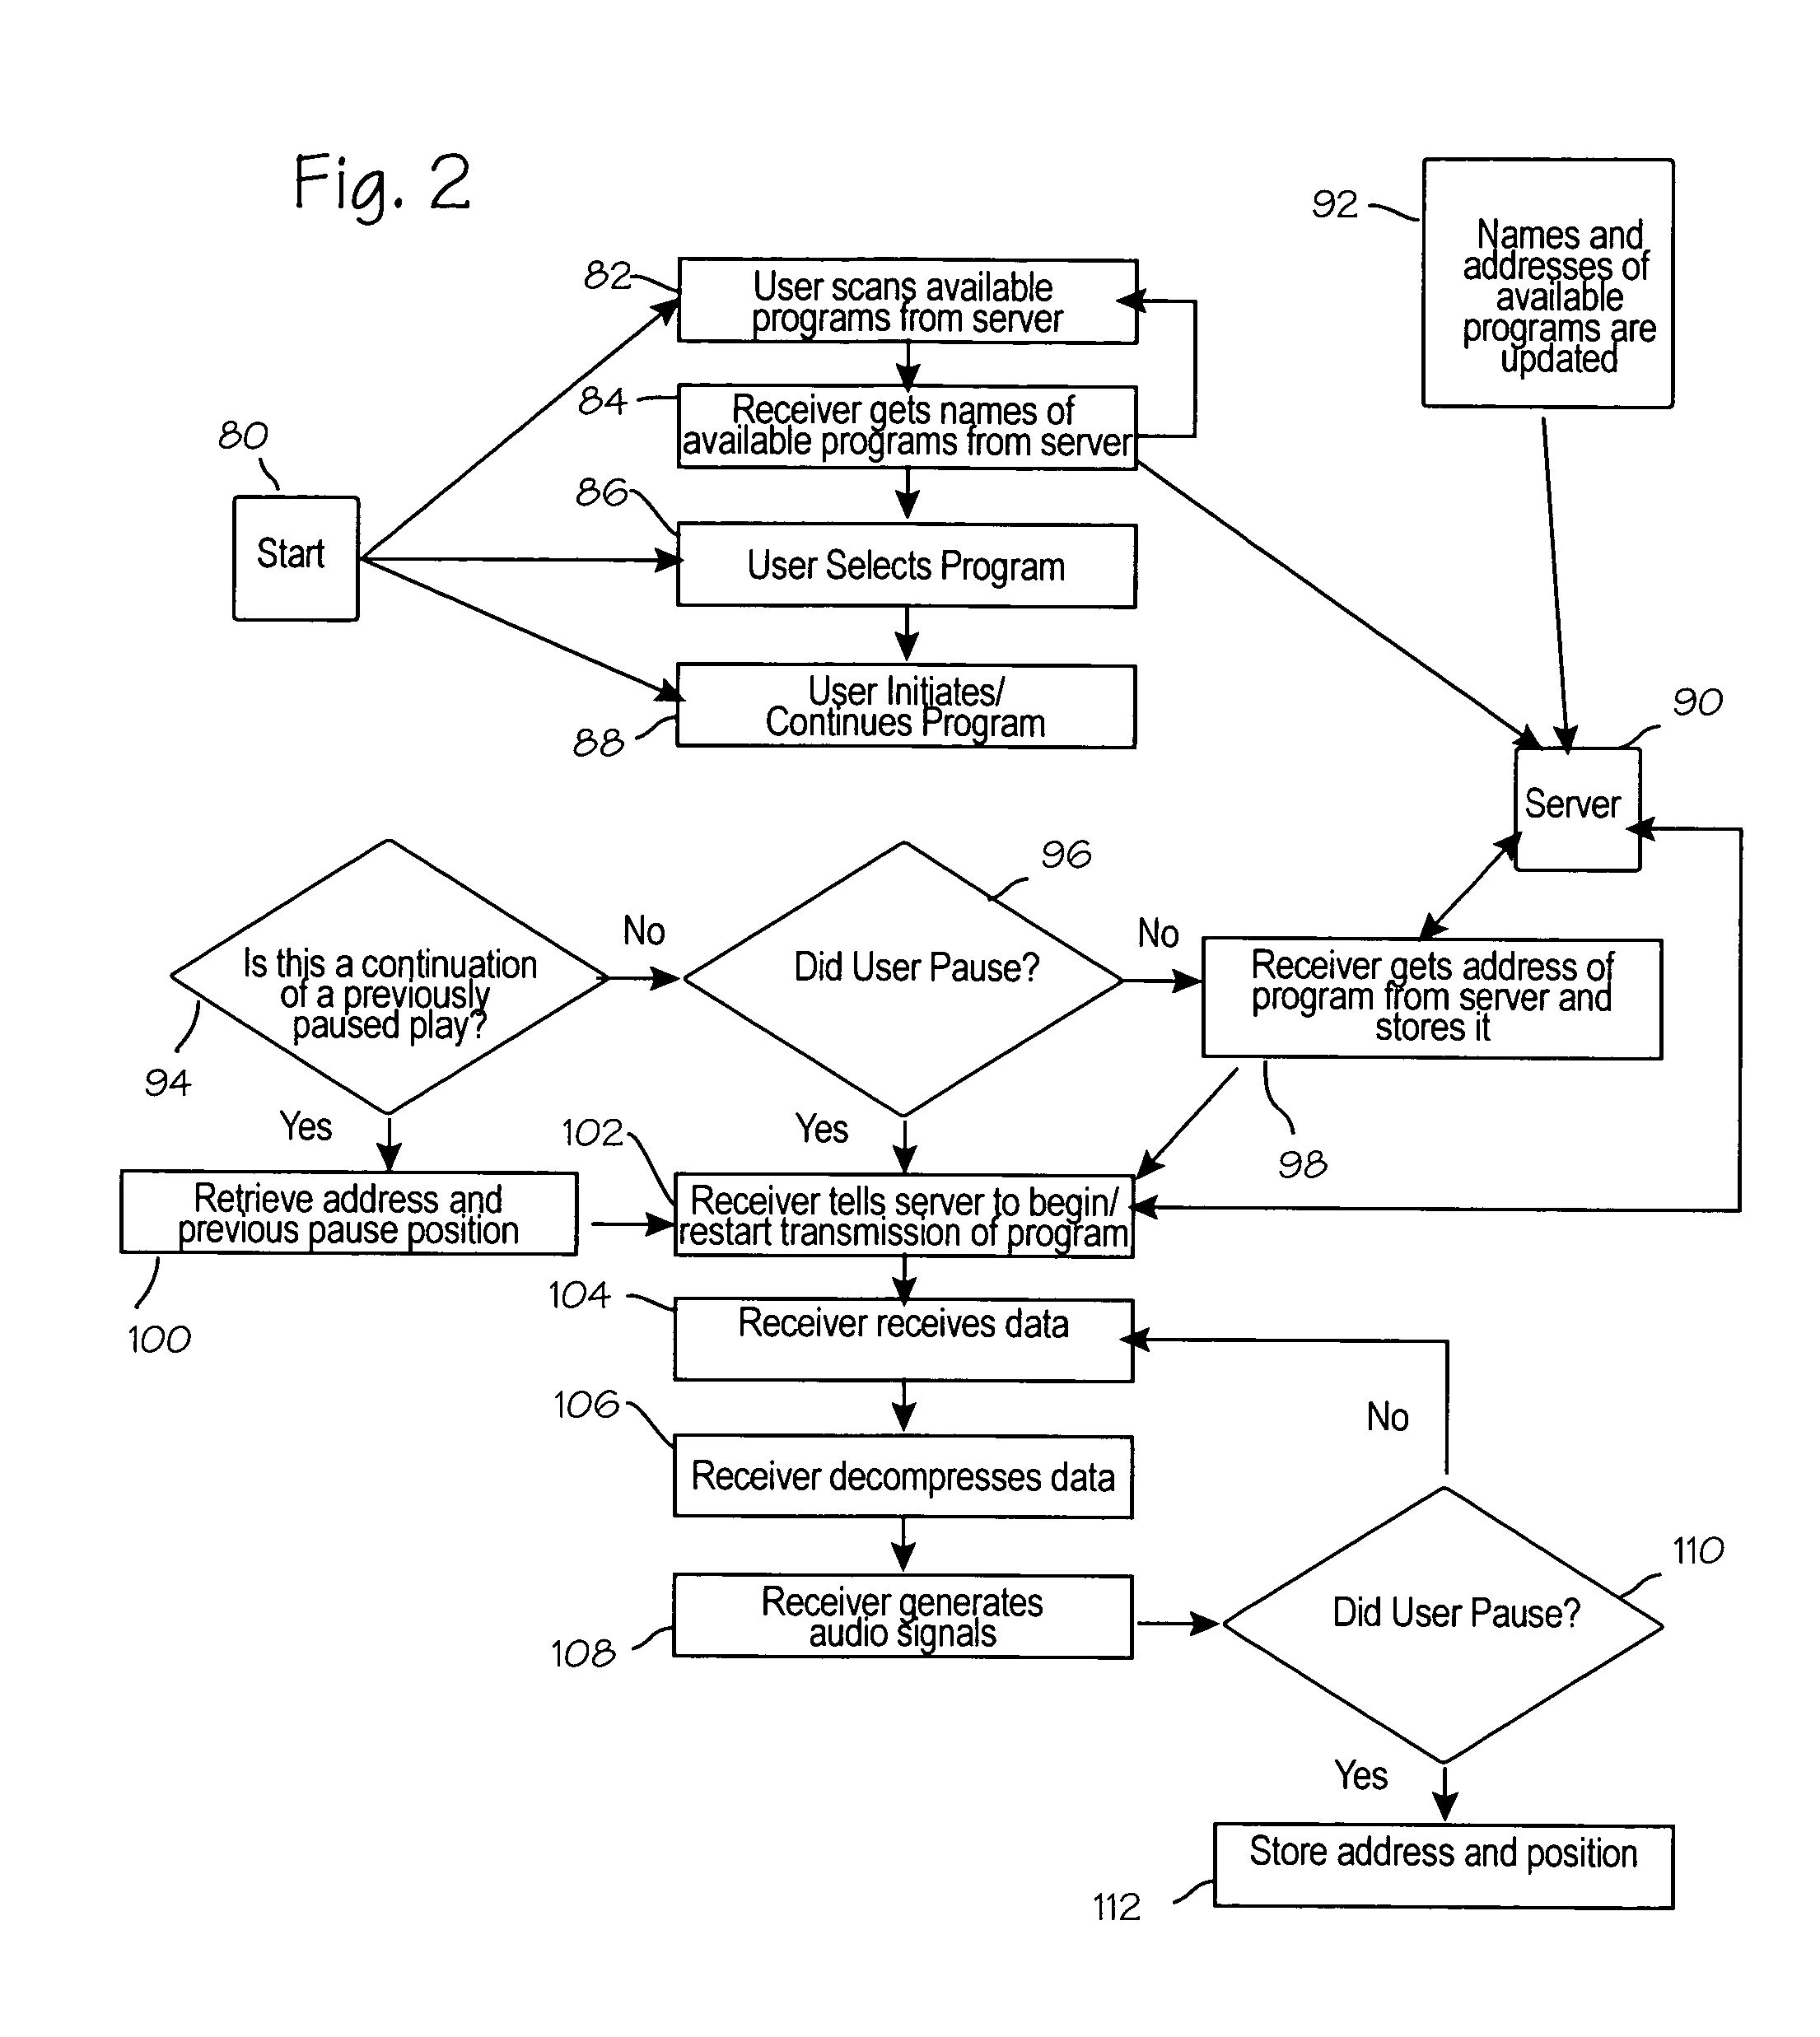 Apparatus for distributing and playing audio information